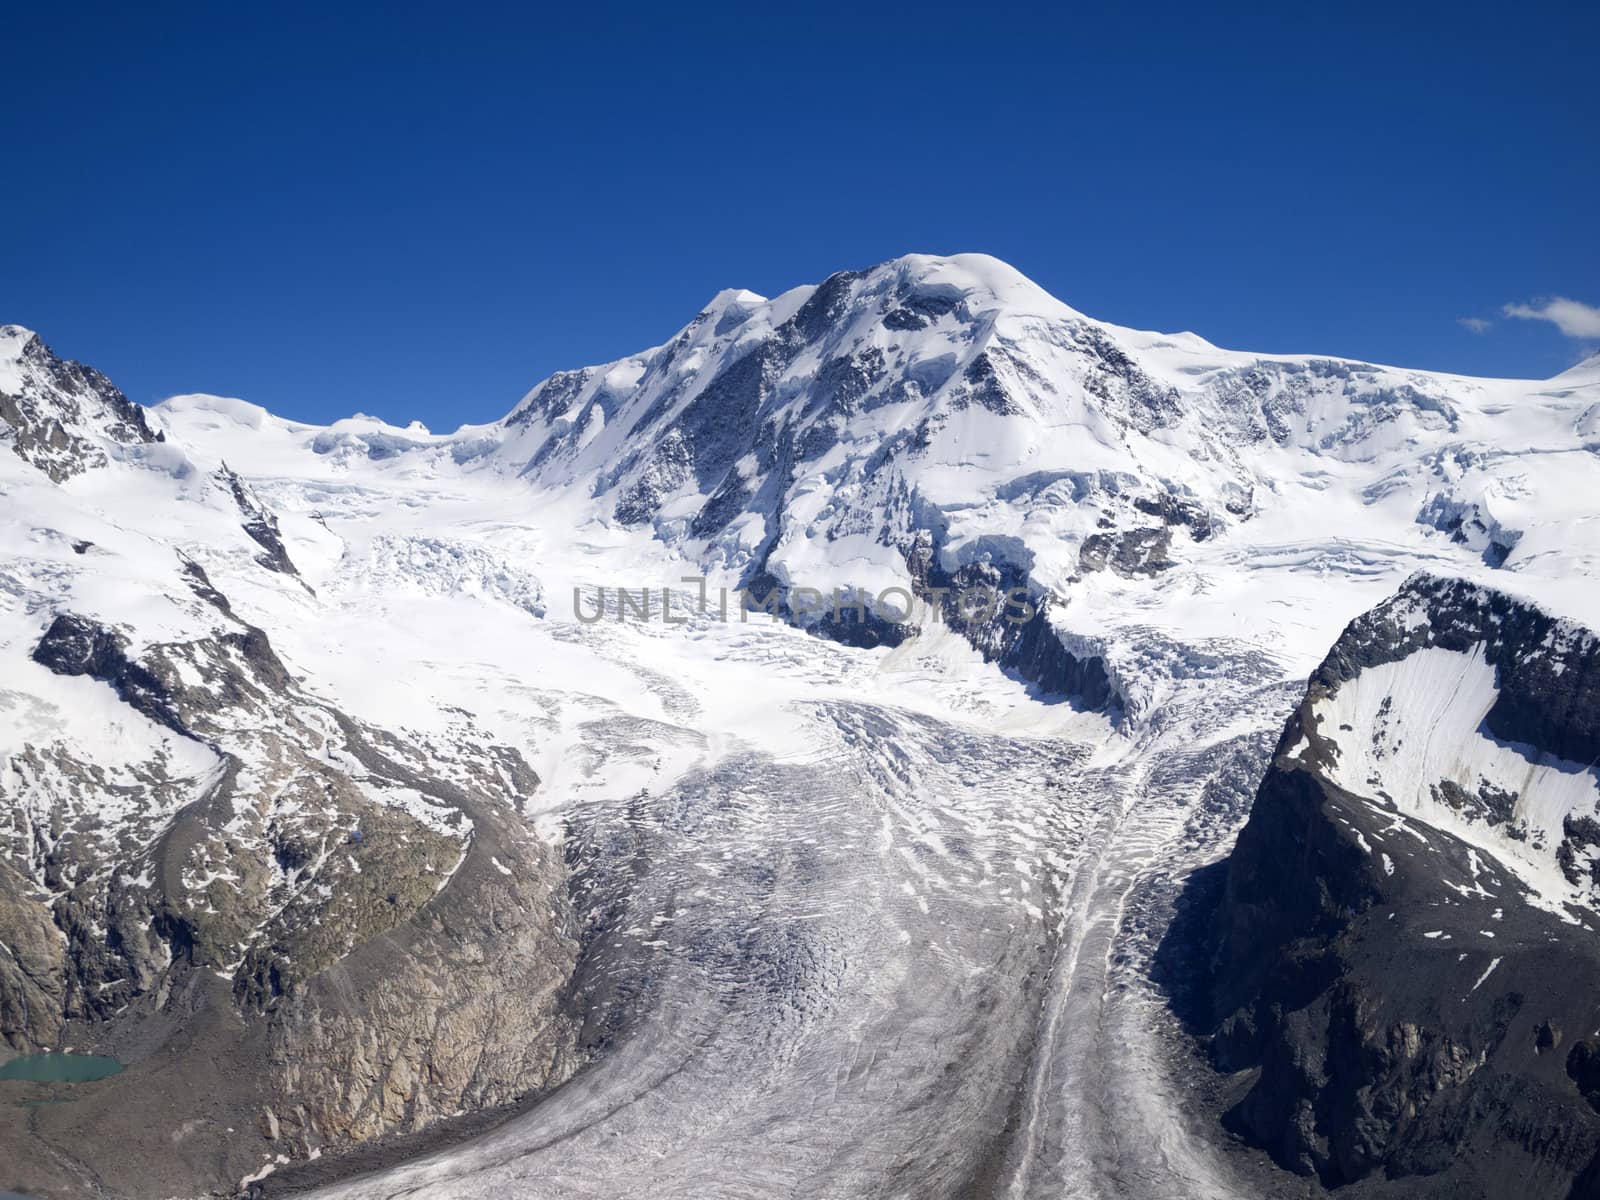 The Gorner Glacier, a valley glacier on the west side of the Monte Rosa Massif, close to Zermatt, Switzerland. It was the second largest glacial system in the Alps after the Aletsch Glacier system.